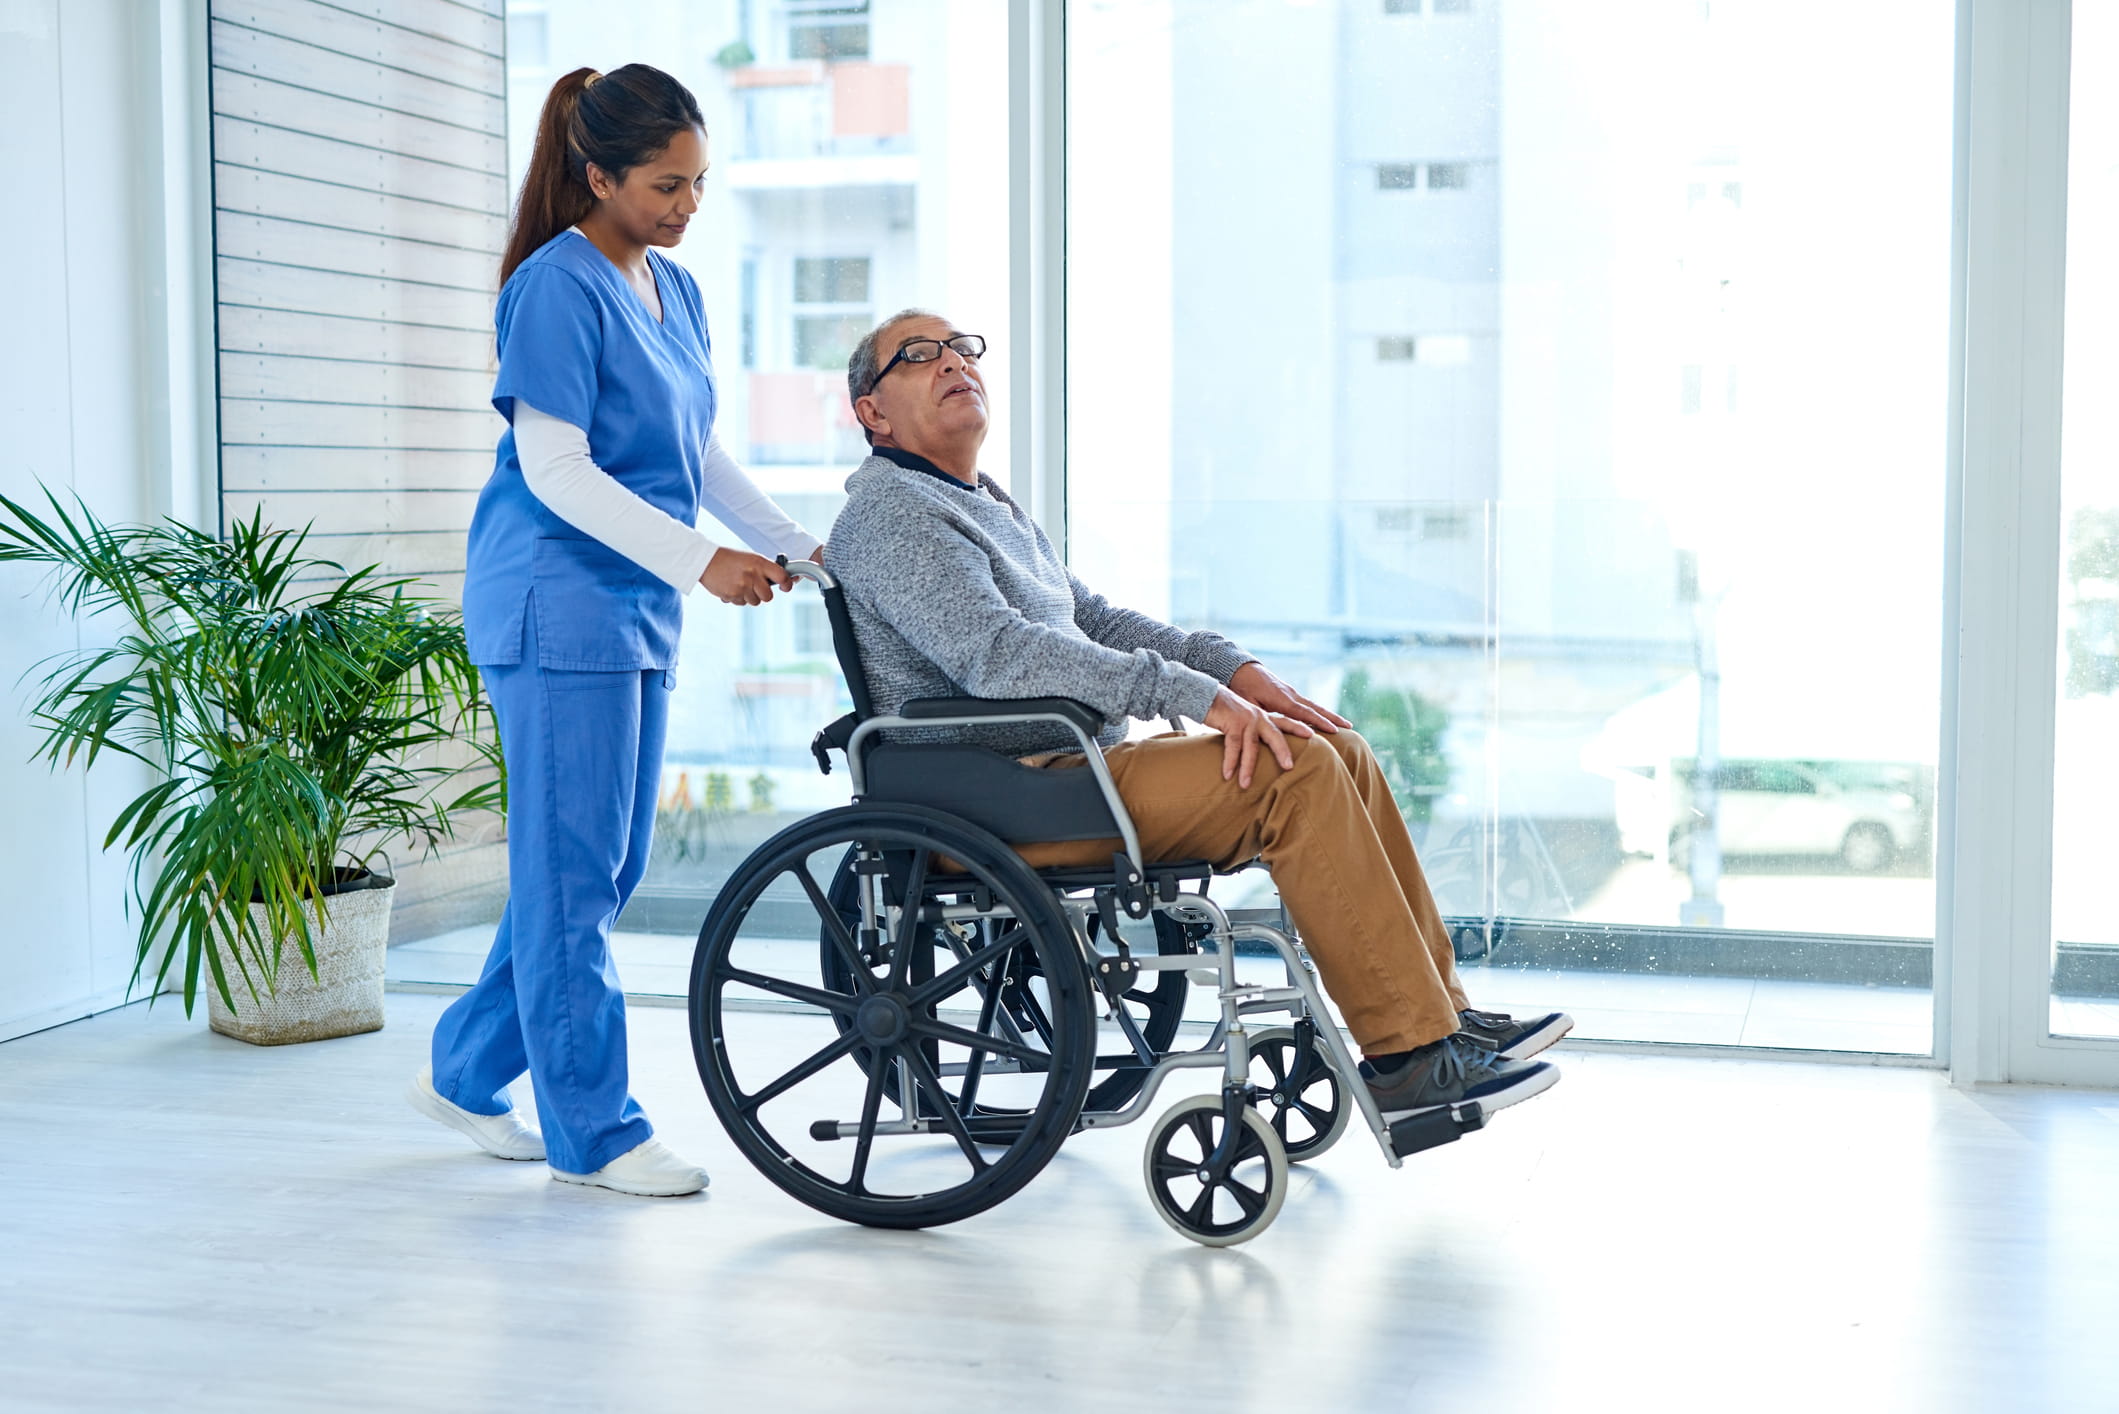 Value-based Care Solutions: Transitions of Care